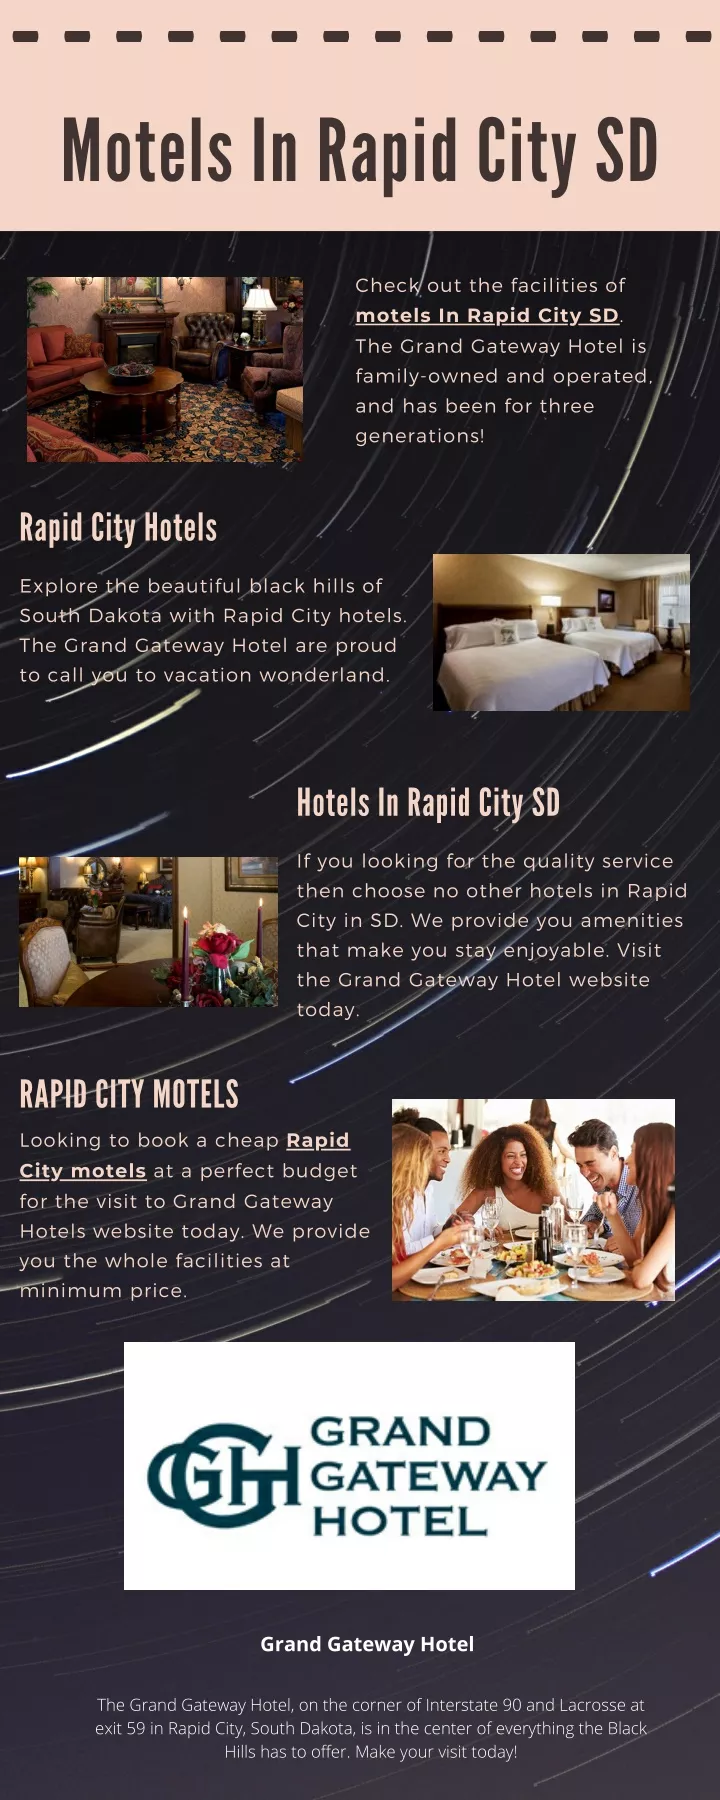 motels in rapid city sd